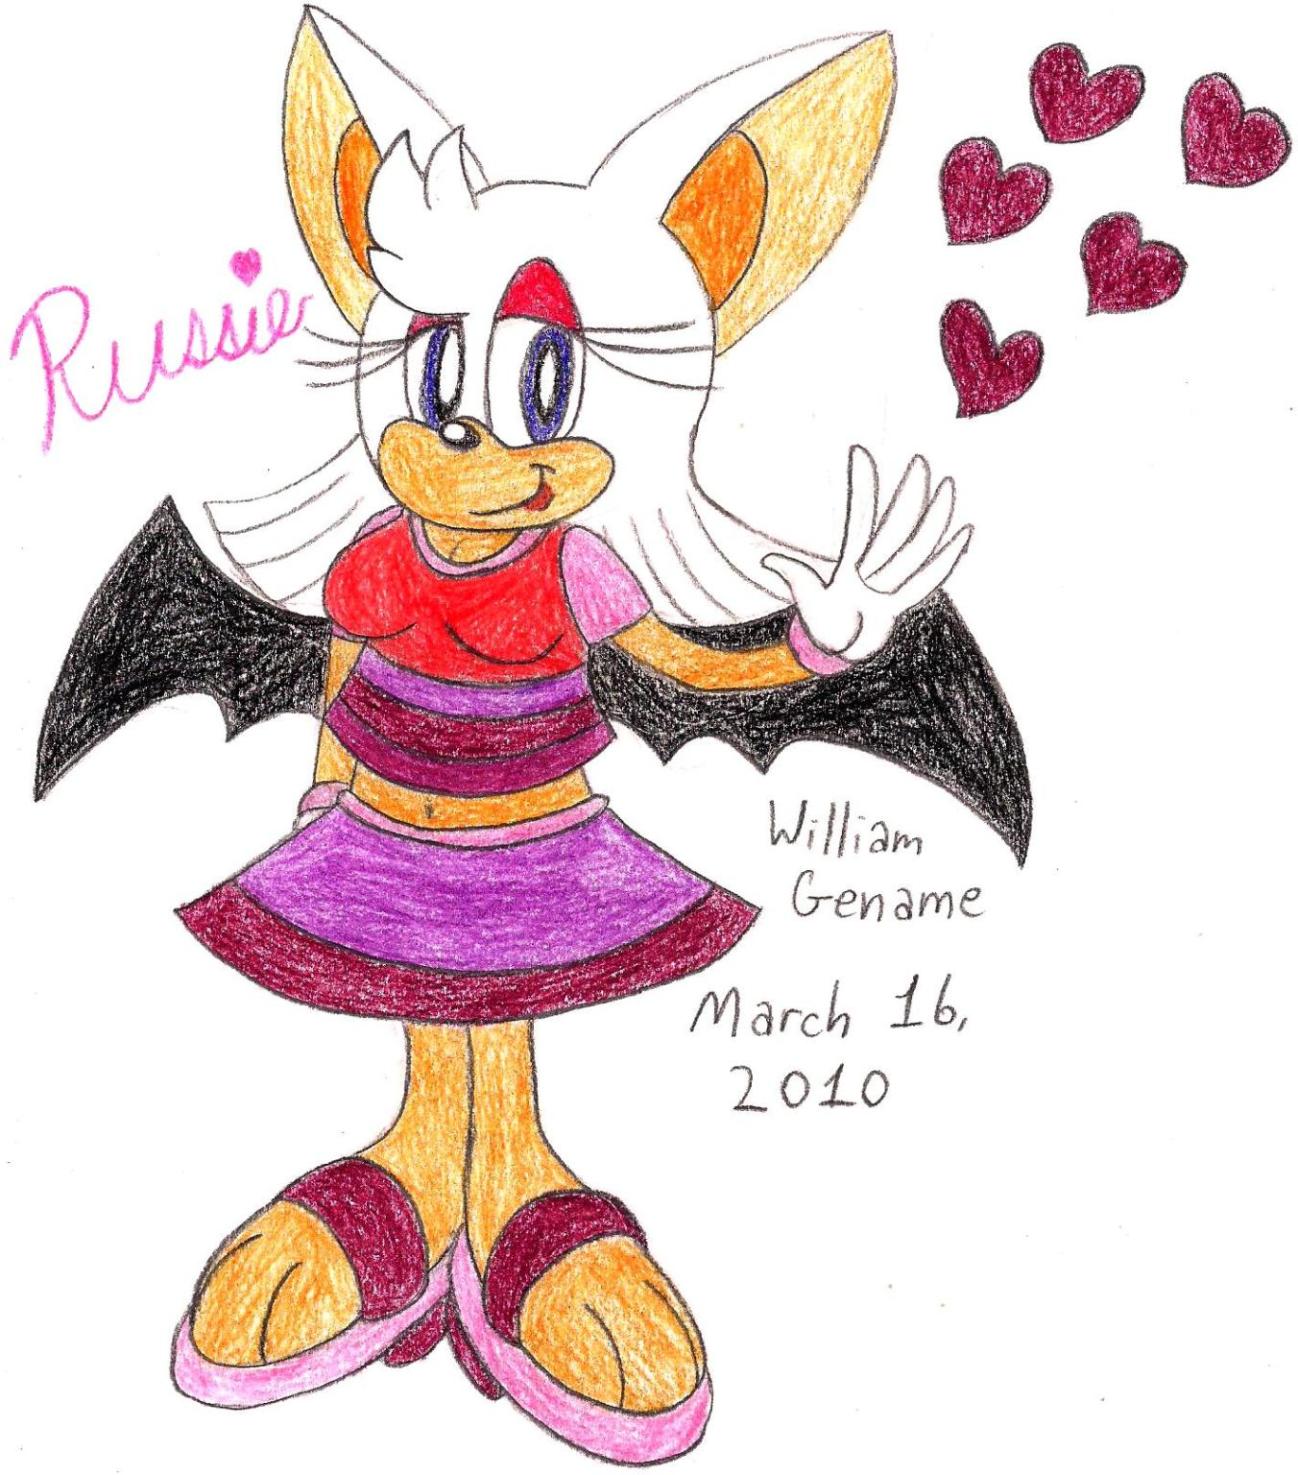 Russie's Spring 2010 Outfit by germanname